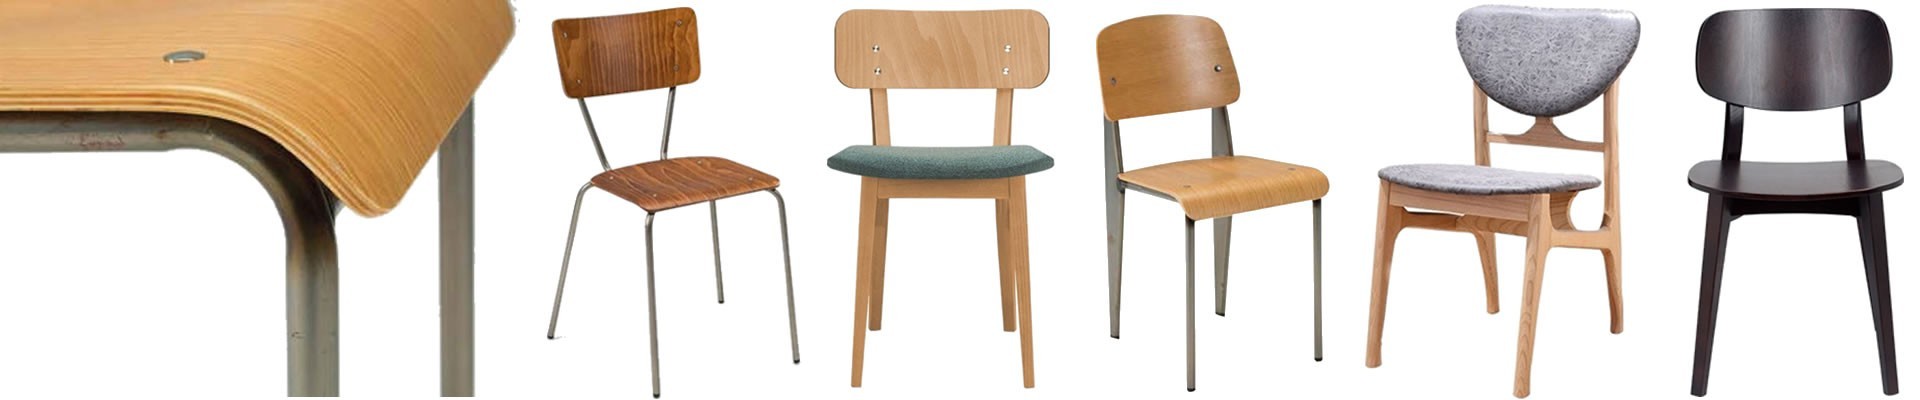 Wooden Chairs | Wooden Dining Chairs